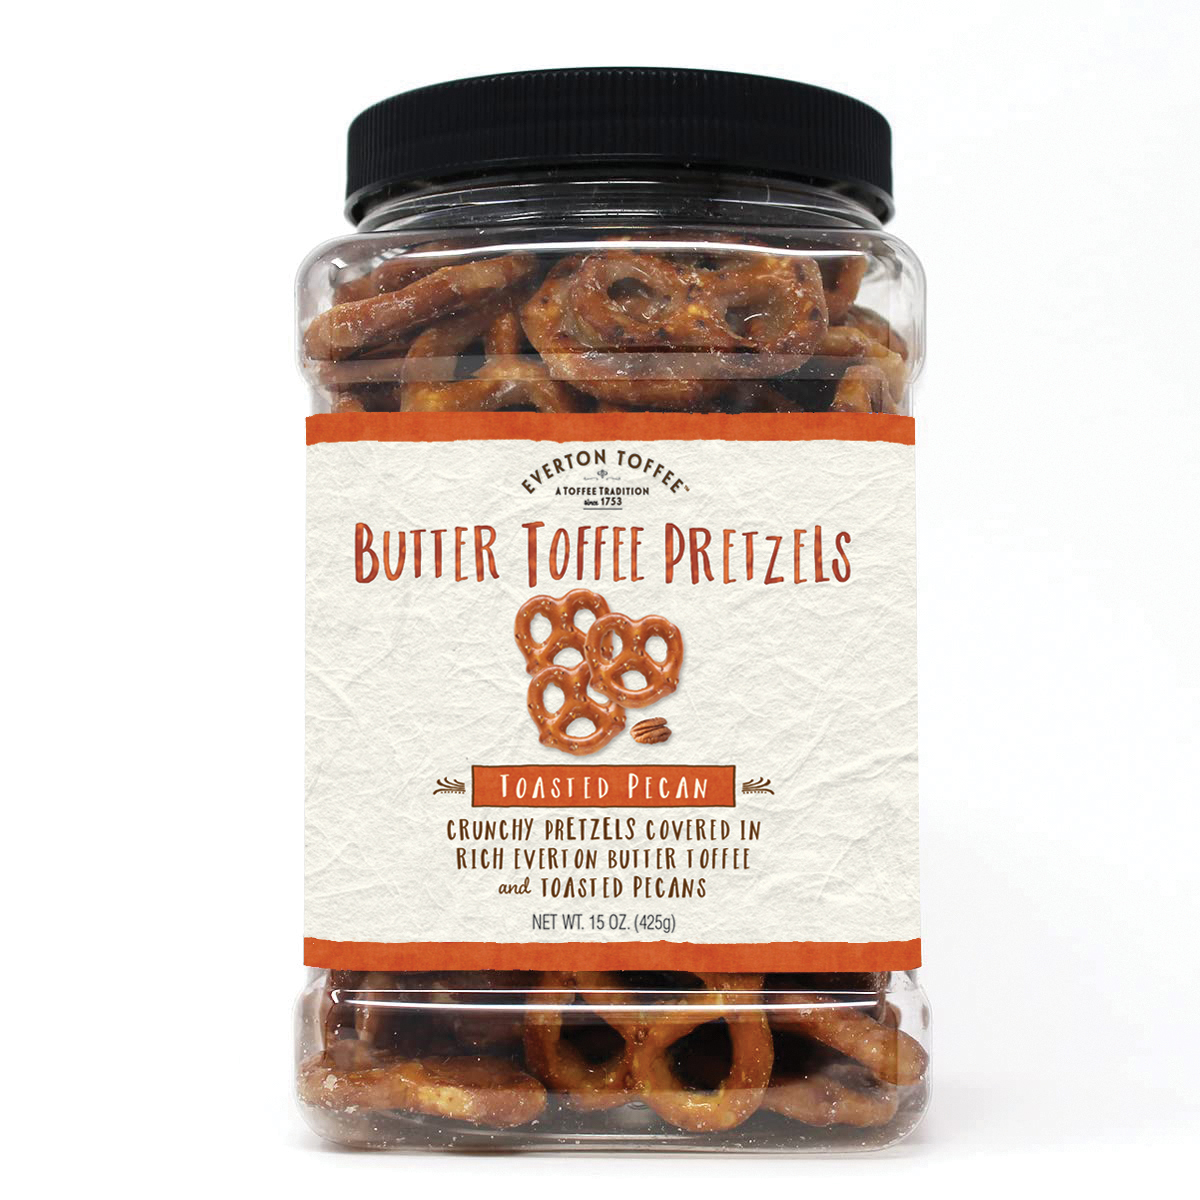 Butter Toffee Pretzels – Toasted Pecan Grab Jar 15 oz – Everton Toffee